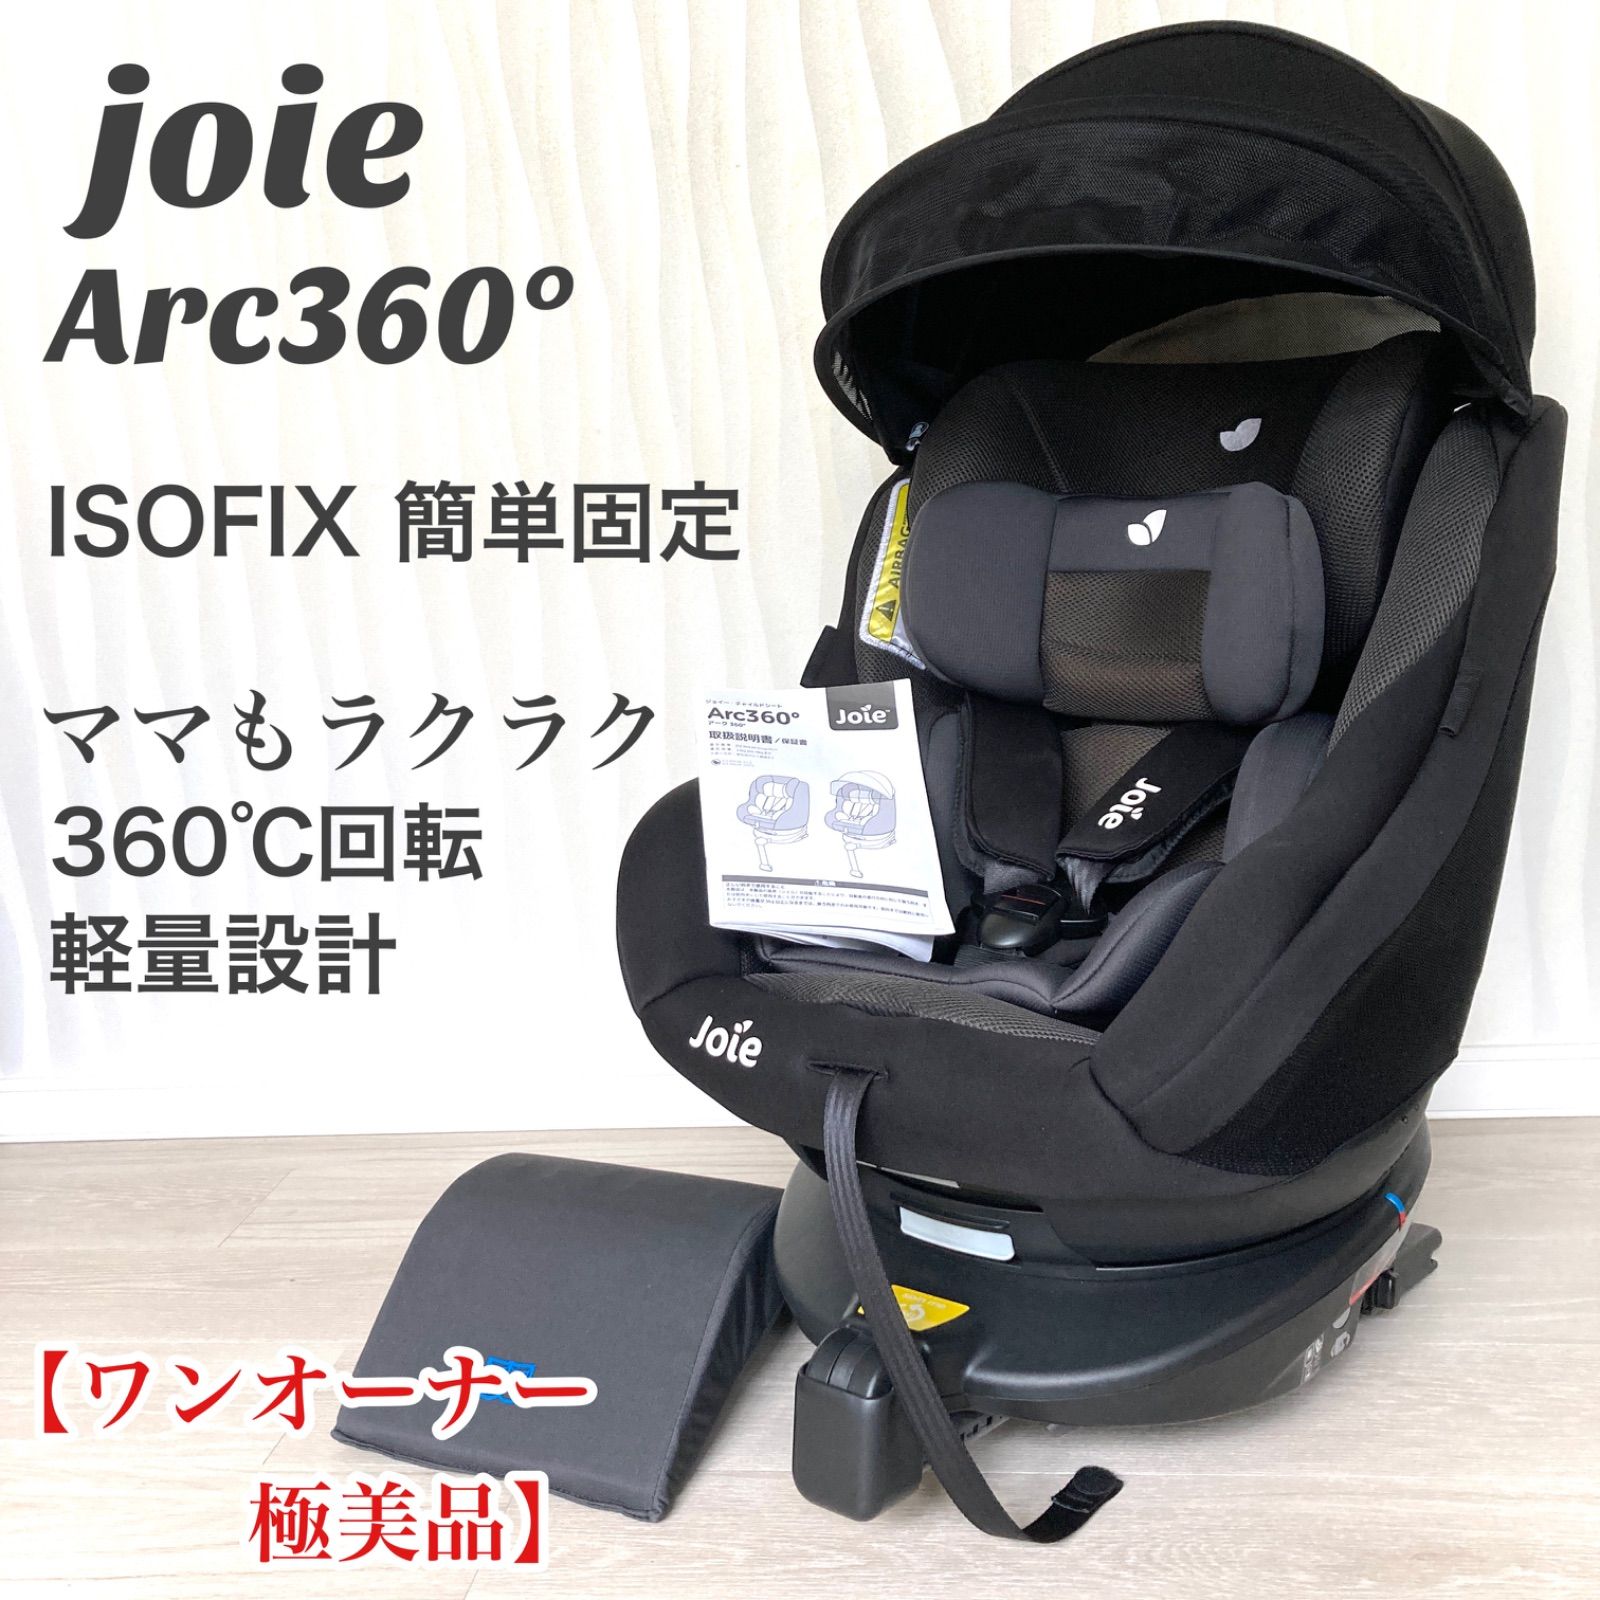 joie ジョイー Arc360° アーク360° キャノピー付 - 移動用品